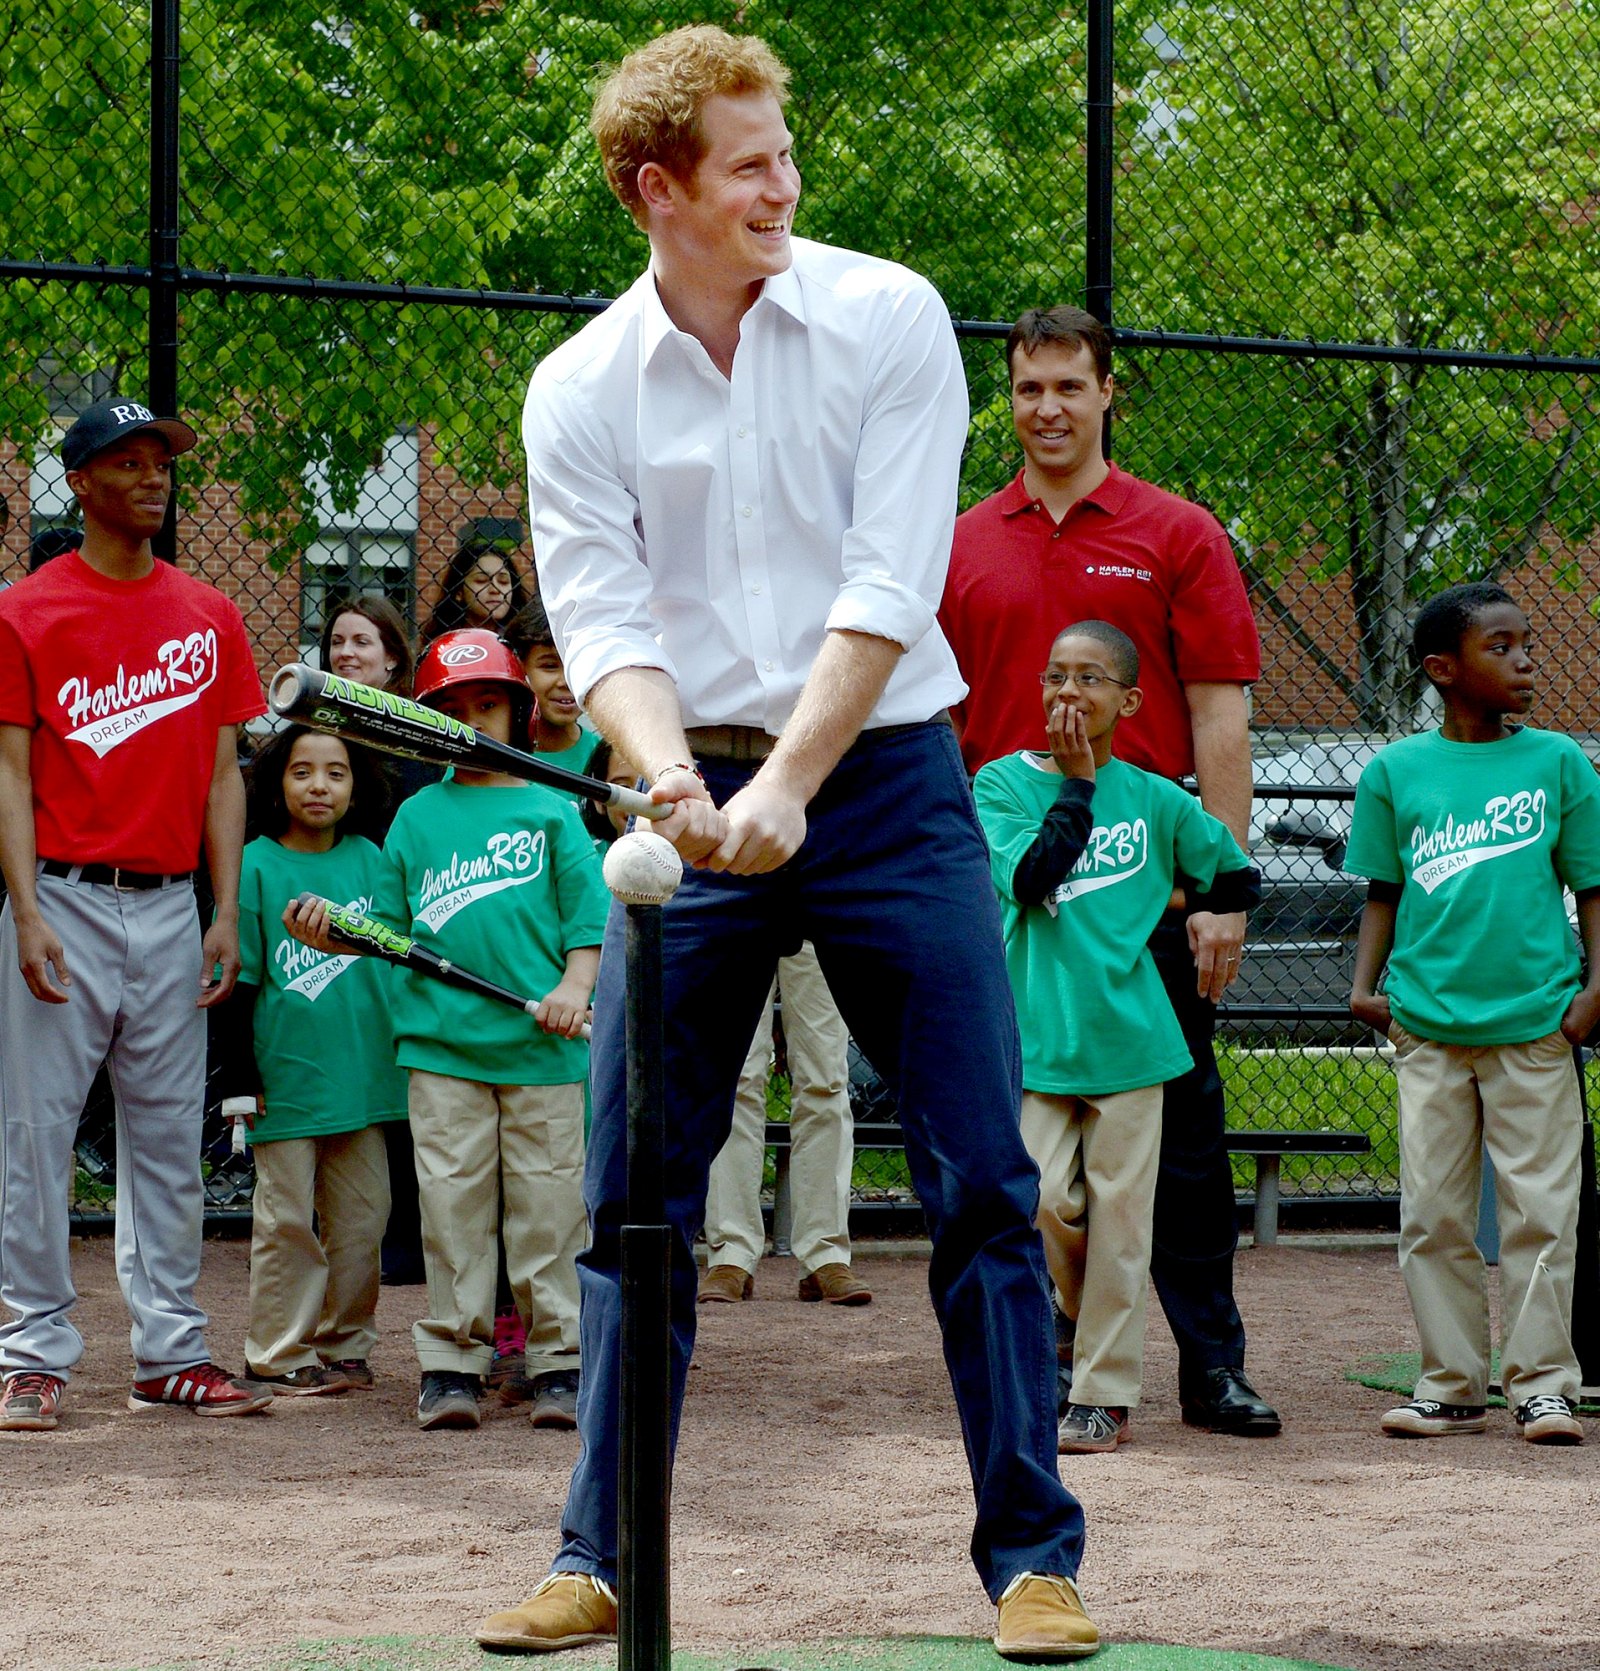 5 2013 Prince Harry Is the Sexiest Royal in Honor of His Birthday